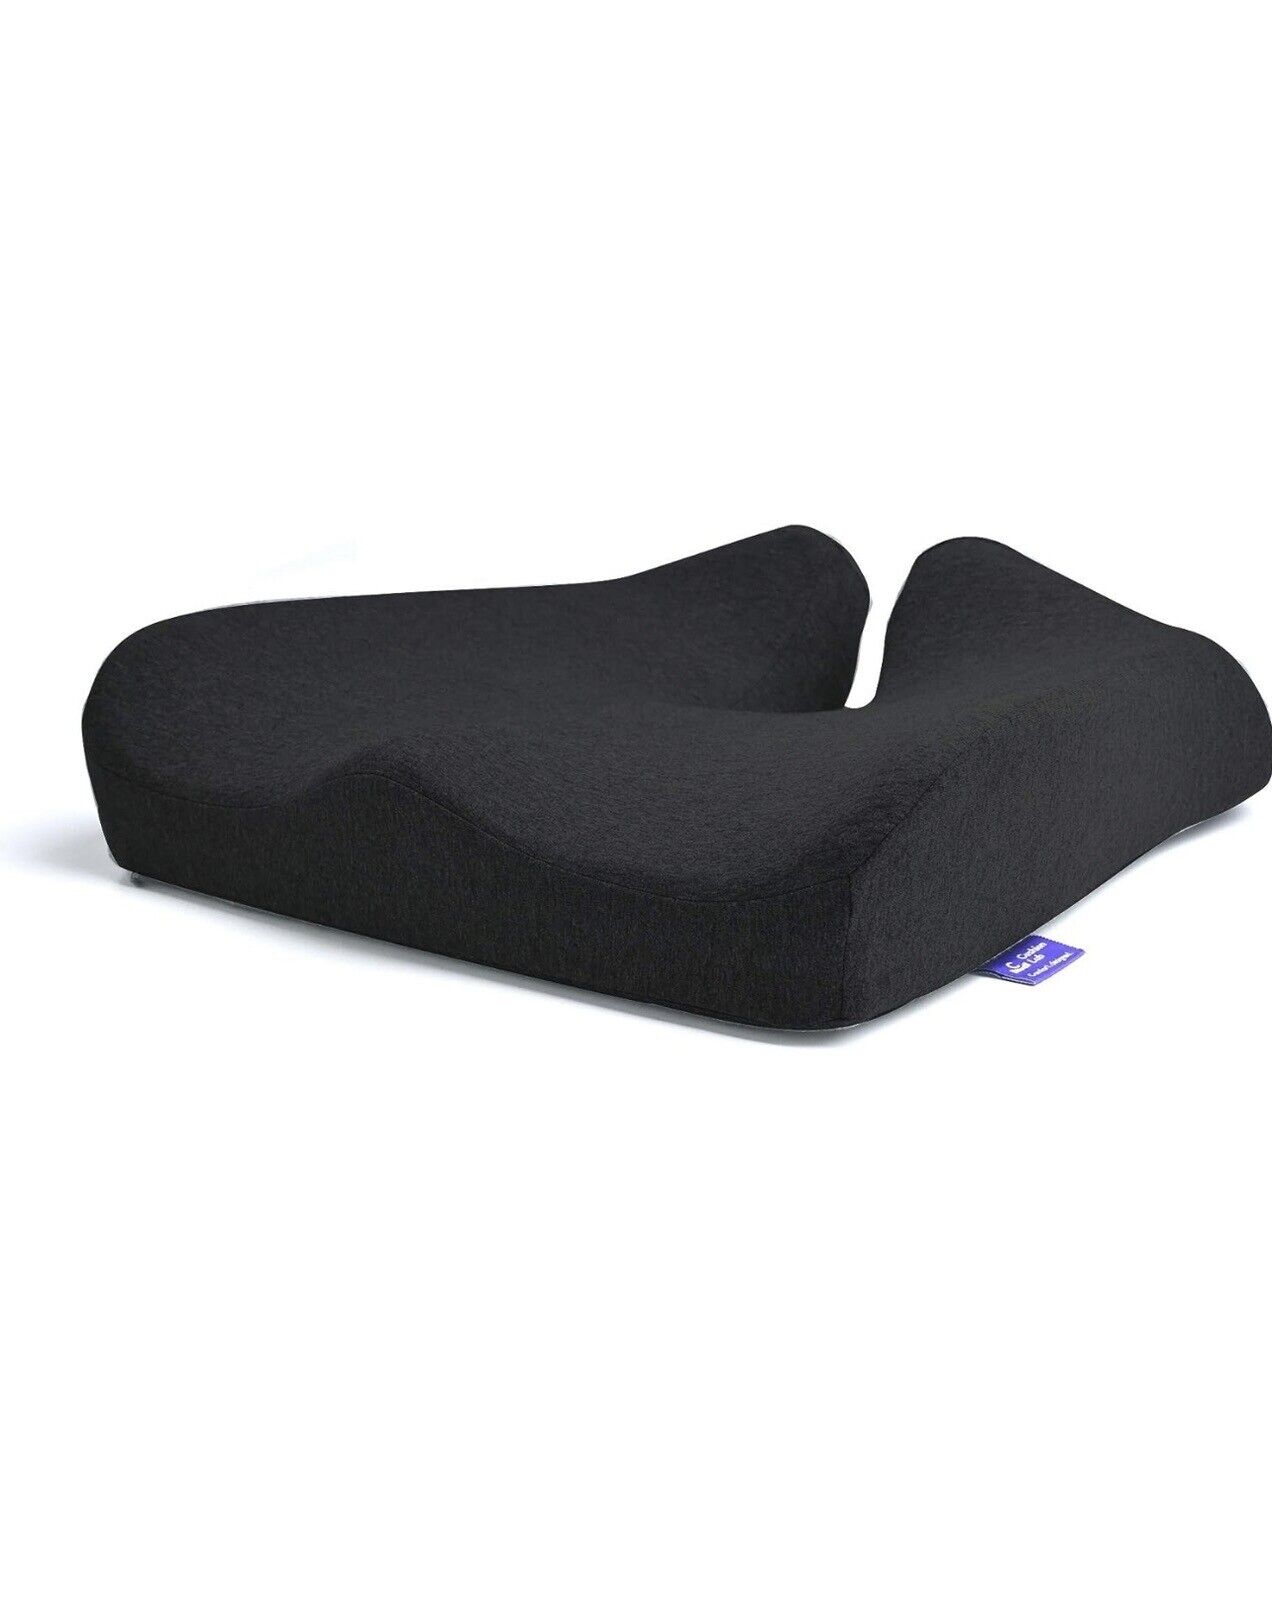 Cushion Lab Patented Pressure Relief Seat Cushion for Long Sitting Hours on  Office/Home Chair, Car Wheelchair Extra-Dense Memory - AliExpress